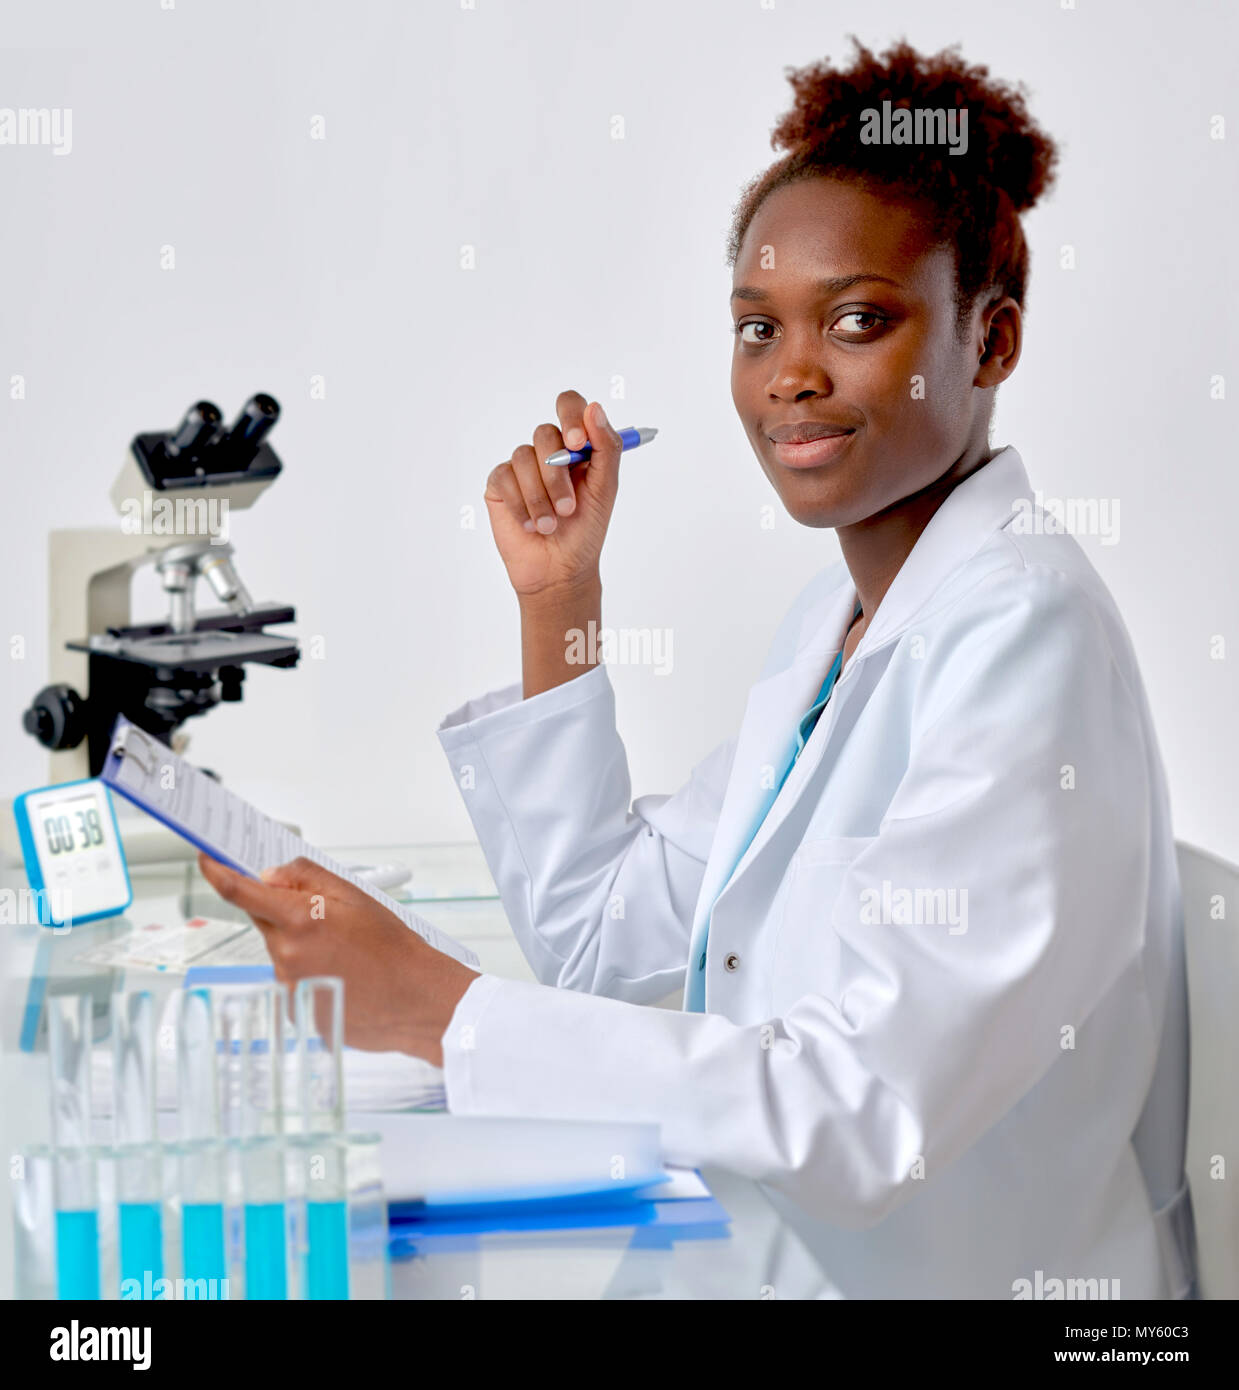 African scientist, medical or or graduate student. Bright, confident young woman in lab coat inerrupted her work to look at the viewer. Stock Photo